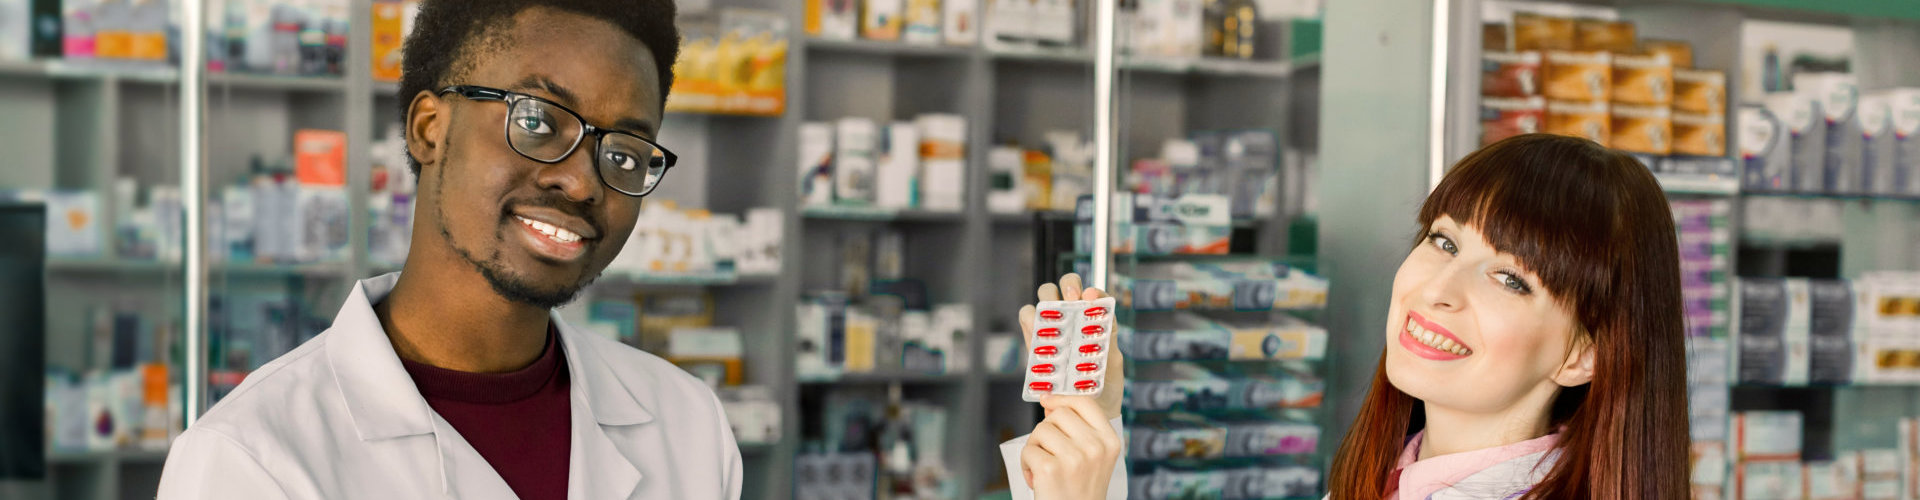 specialist of pharmacy making notes on clipboard during inventory in drugstore